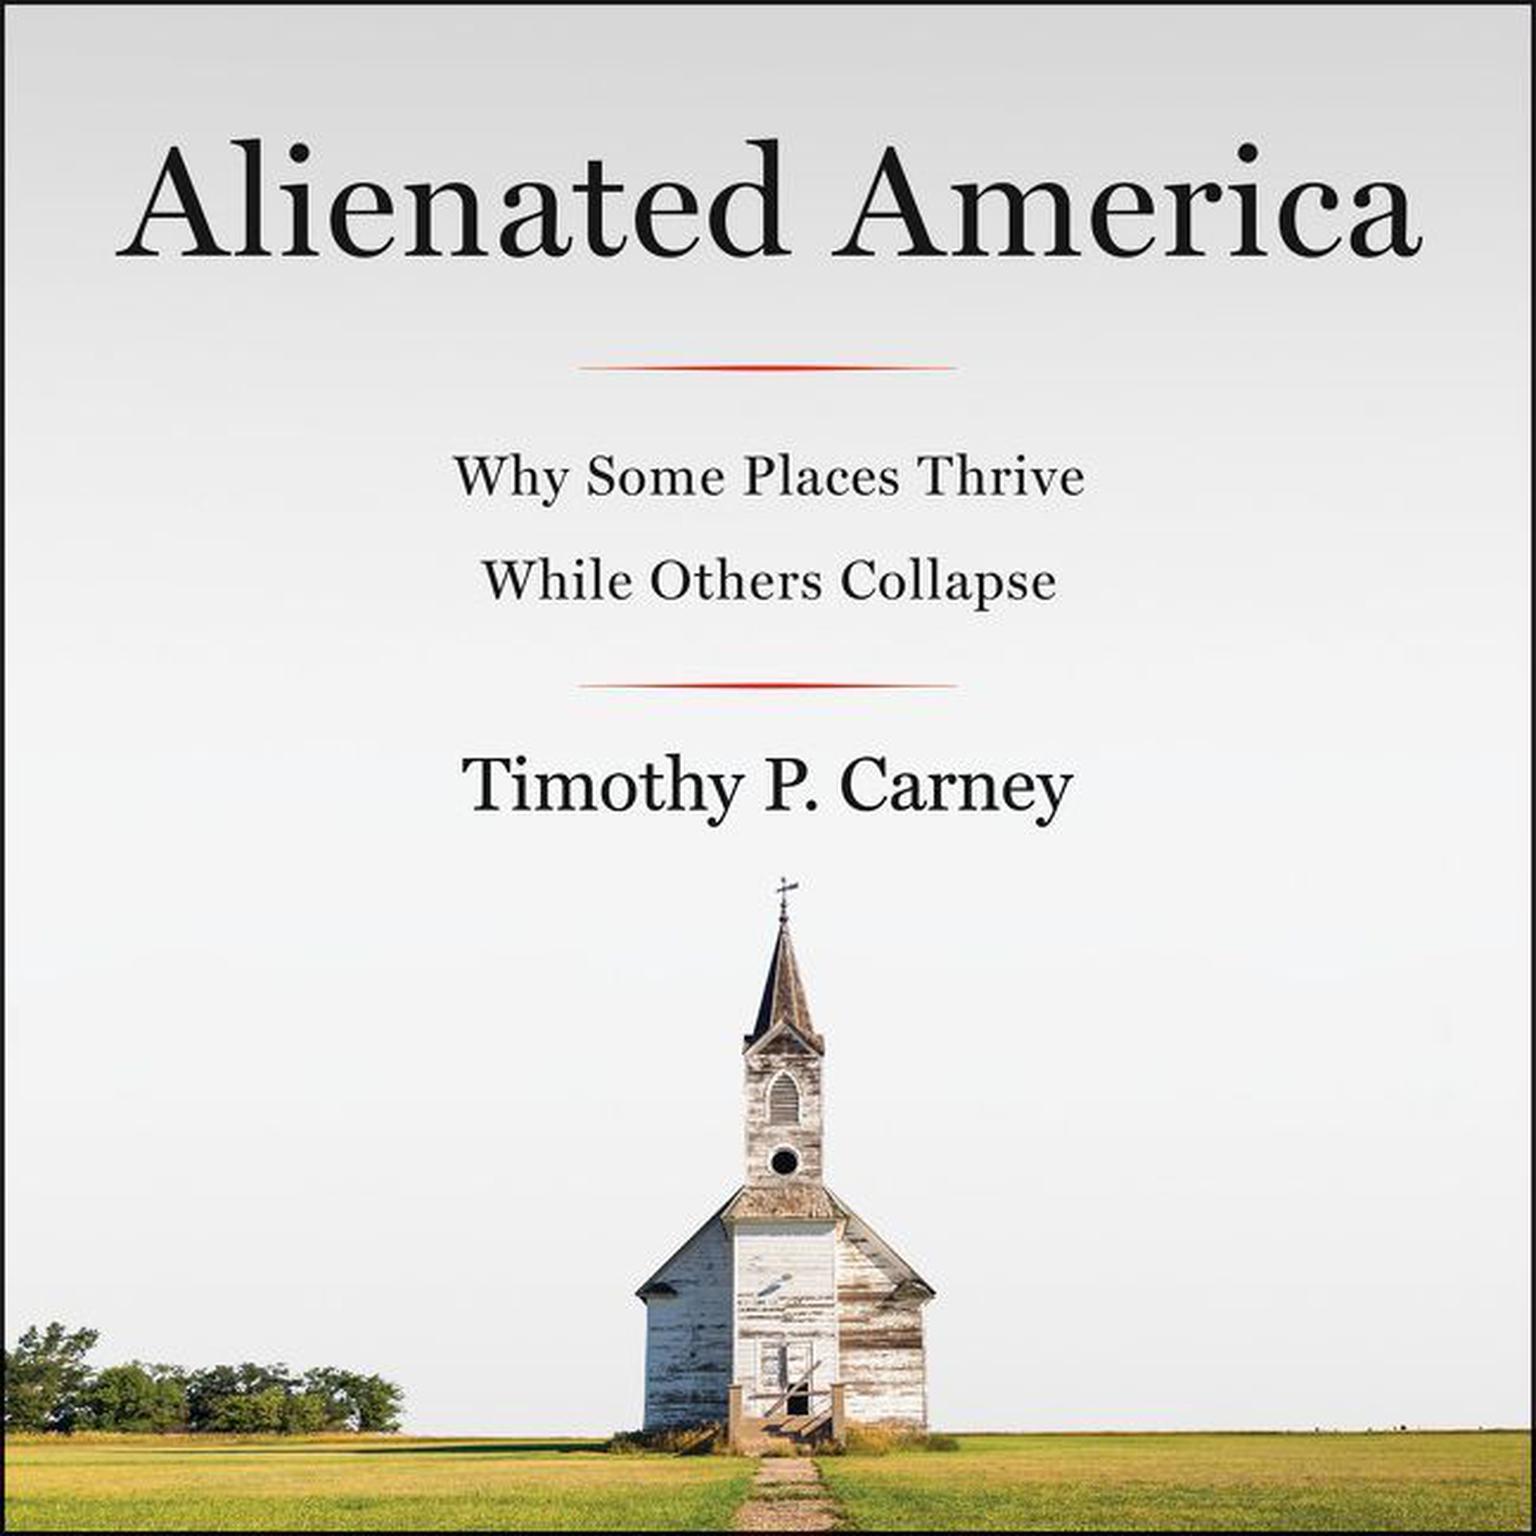 Alienated America: Why Some Places Thrive While Others Collapse Audiobook, by Timothy P. Carney